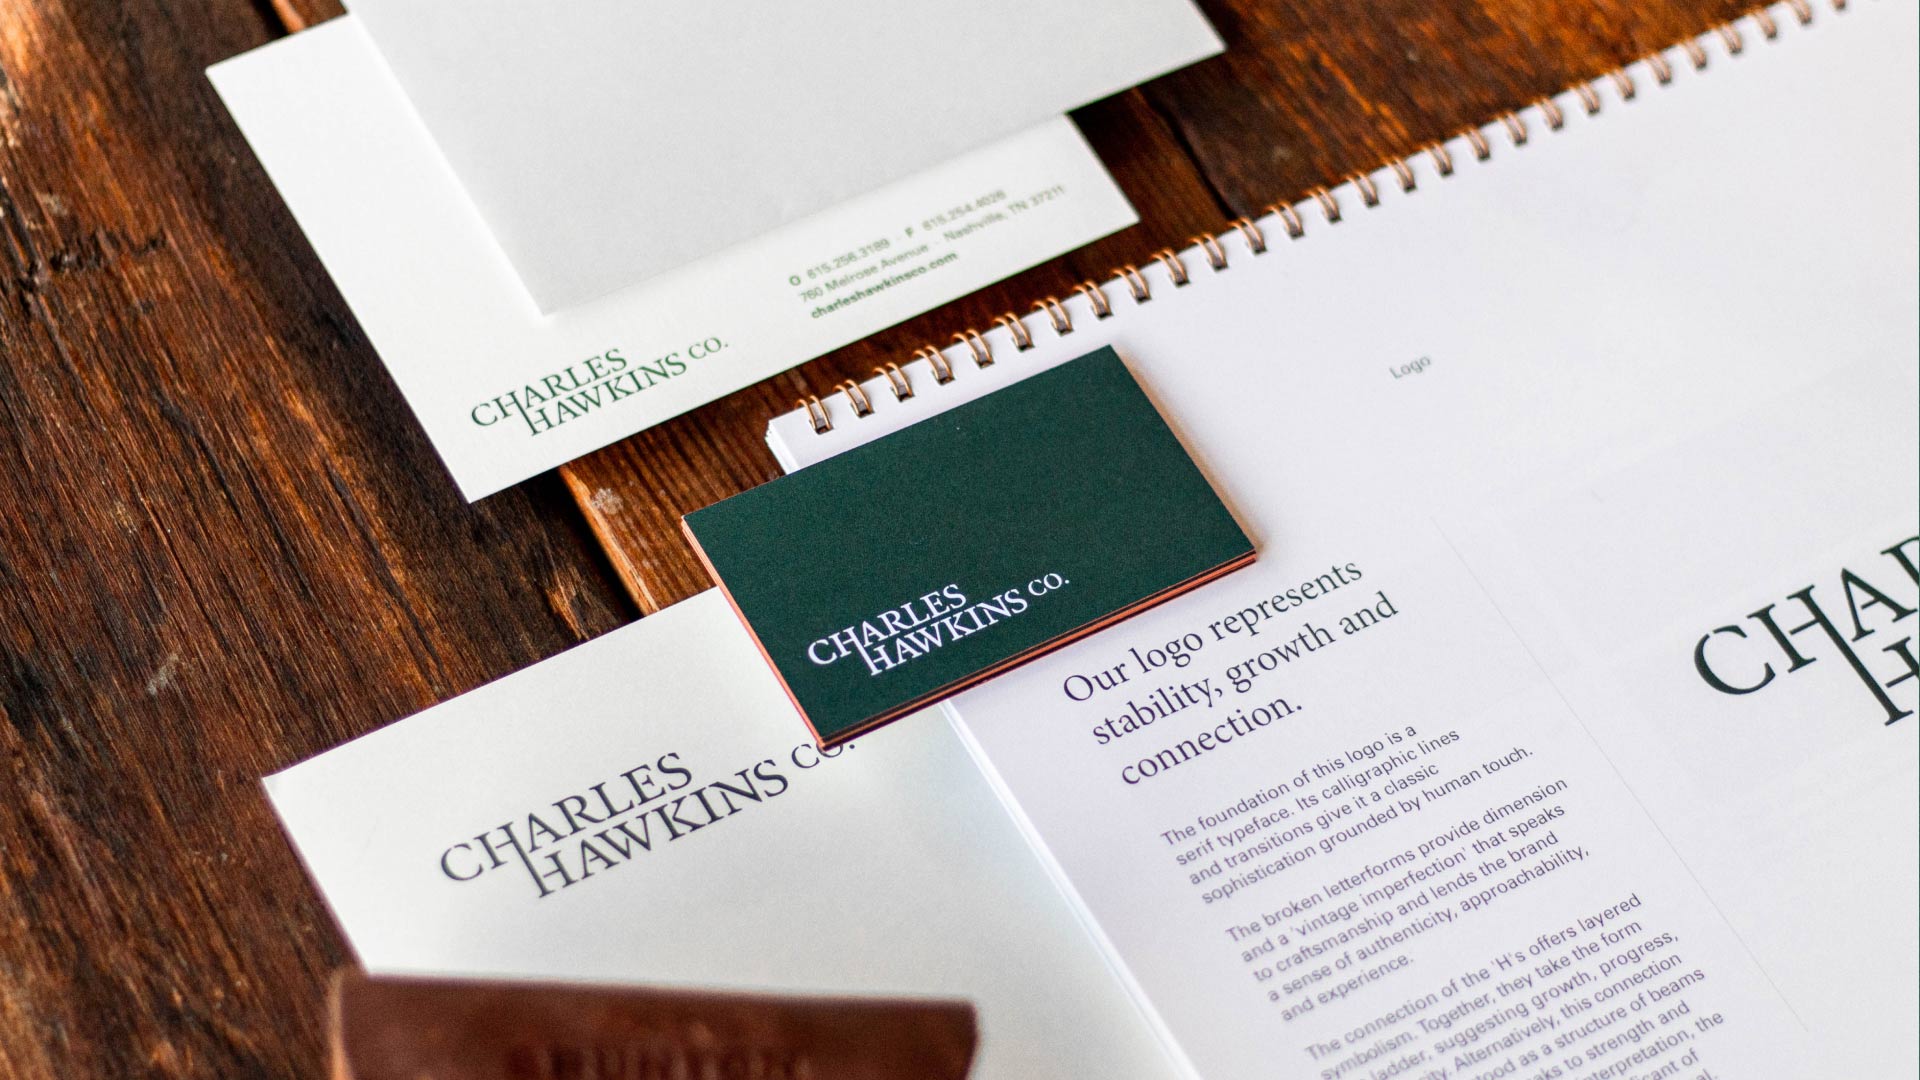 Flat lay of print collateral featuring the Charles Hawkins Co. branding